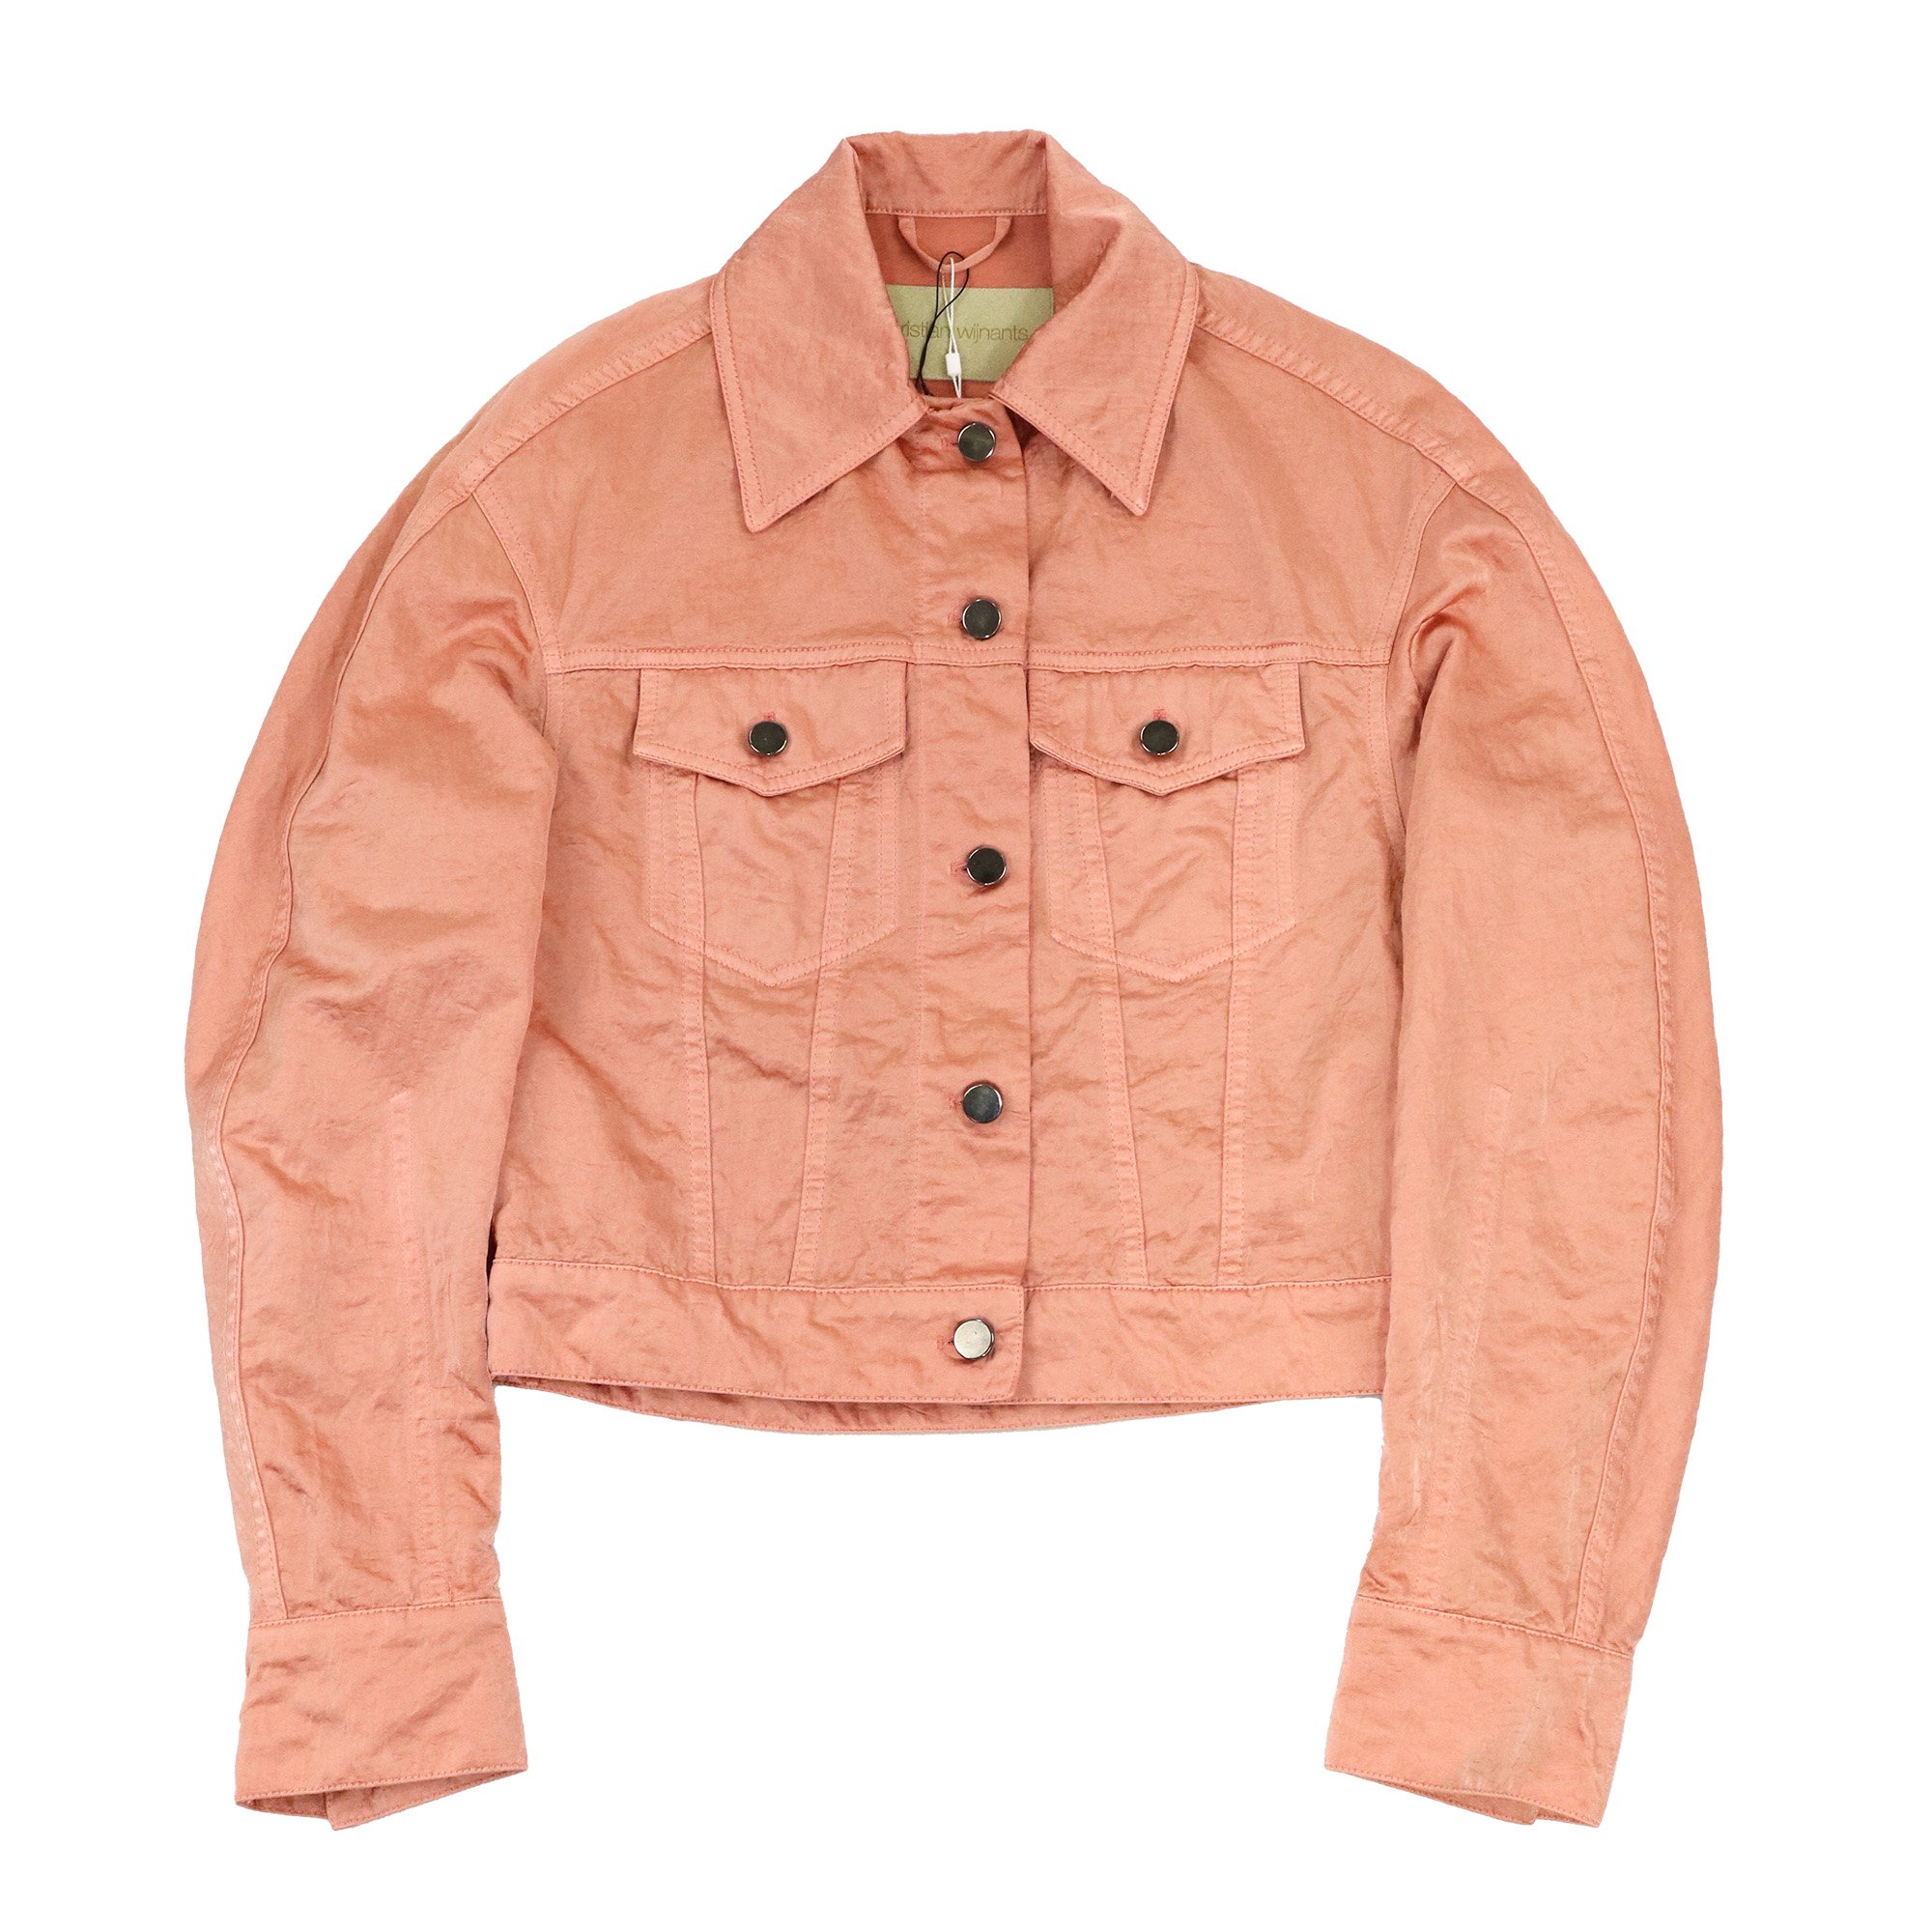 <img class='new_mark_img1' src='https://img.shop-pro.jp/img/new/icons6.gif' style='border:none;display:inline;margin:0px;padding:0px;width:auto;' />CHRISTIAN WIJNANTS L/S Nylon jacket【PINK】